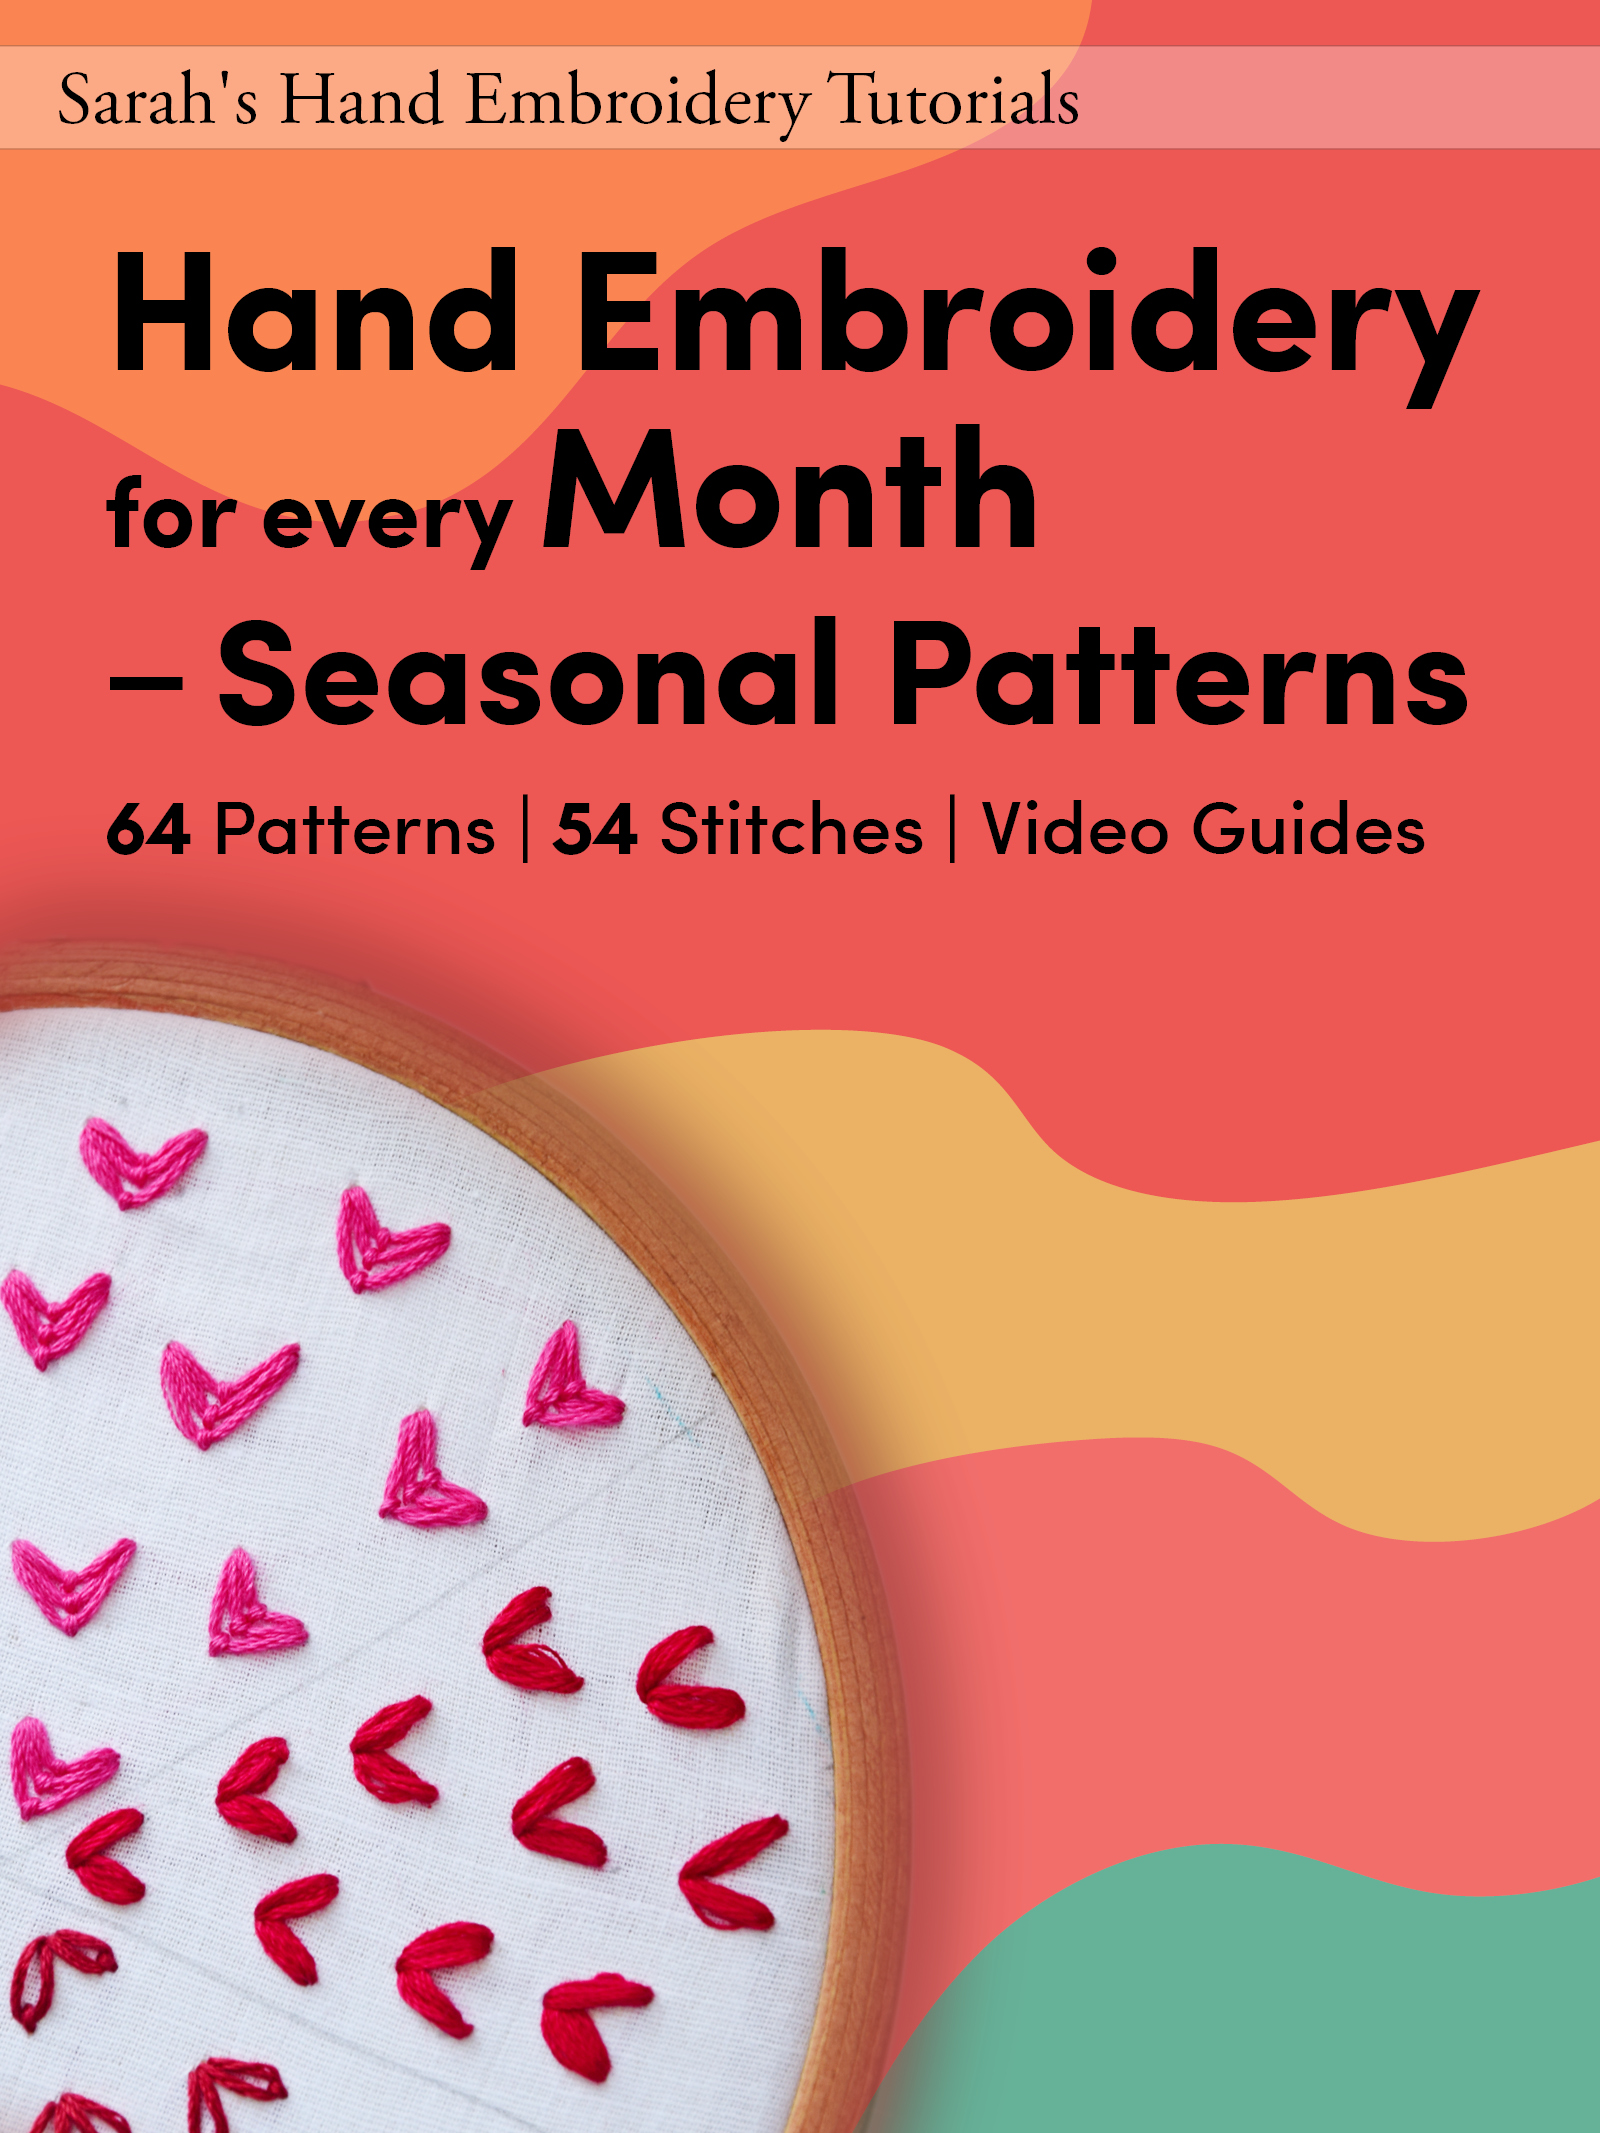 Hand Embroidery For Every Month - Seasonal Patterns - Sarah's Hand  Embroidery Tutorials